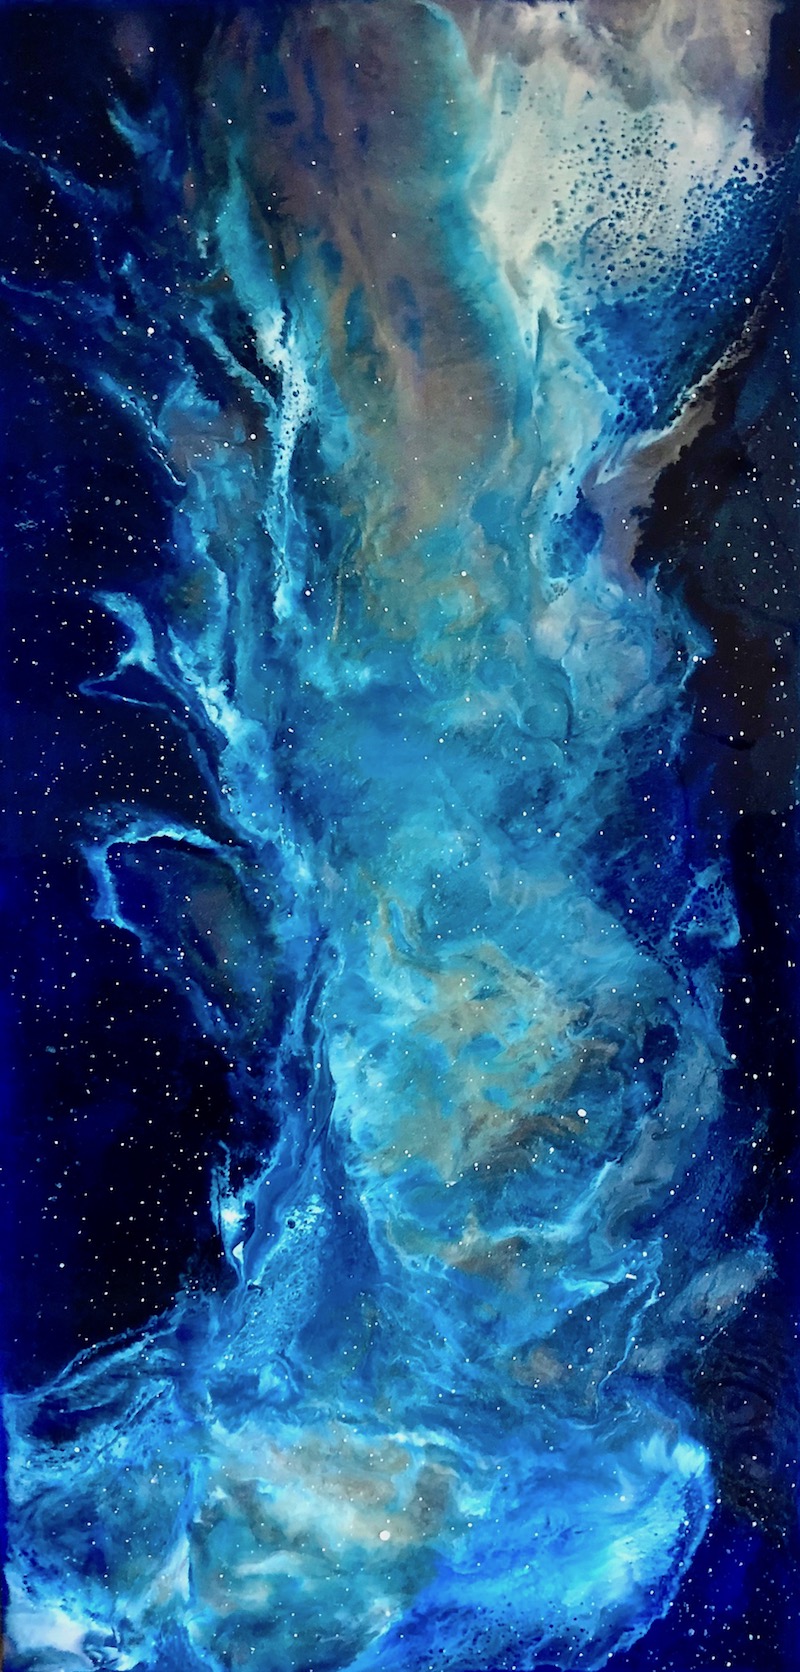 The Deep- Resin Abstract Painting. (Resin is like a liquid glass). Pour Painting. Modern Art. Nebula Abstract Ocean Theme. Long Vertical